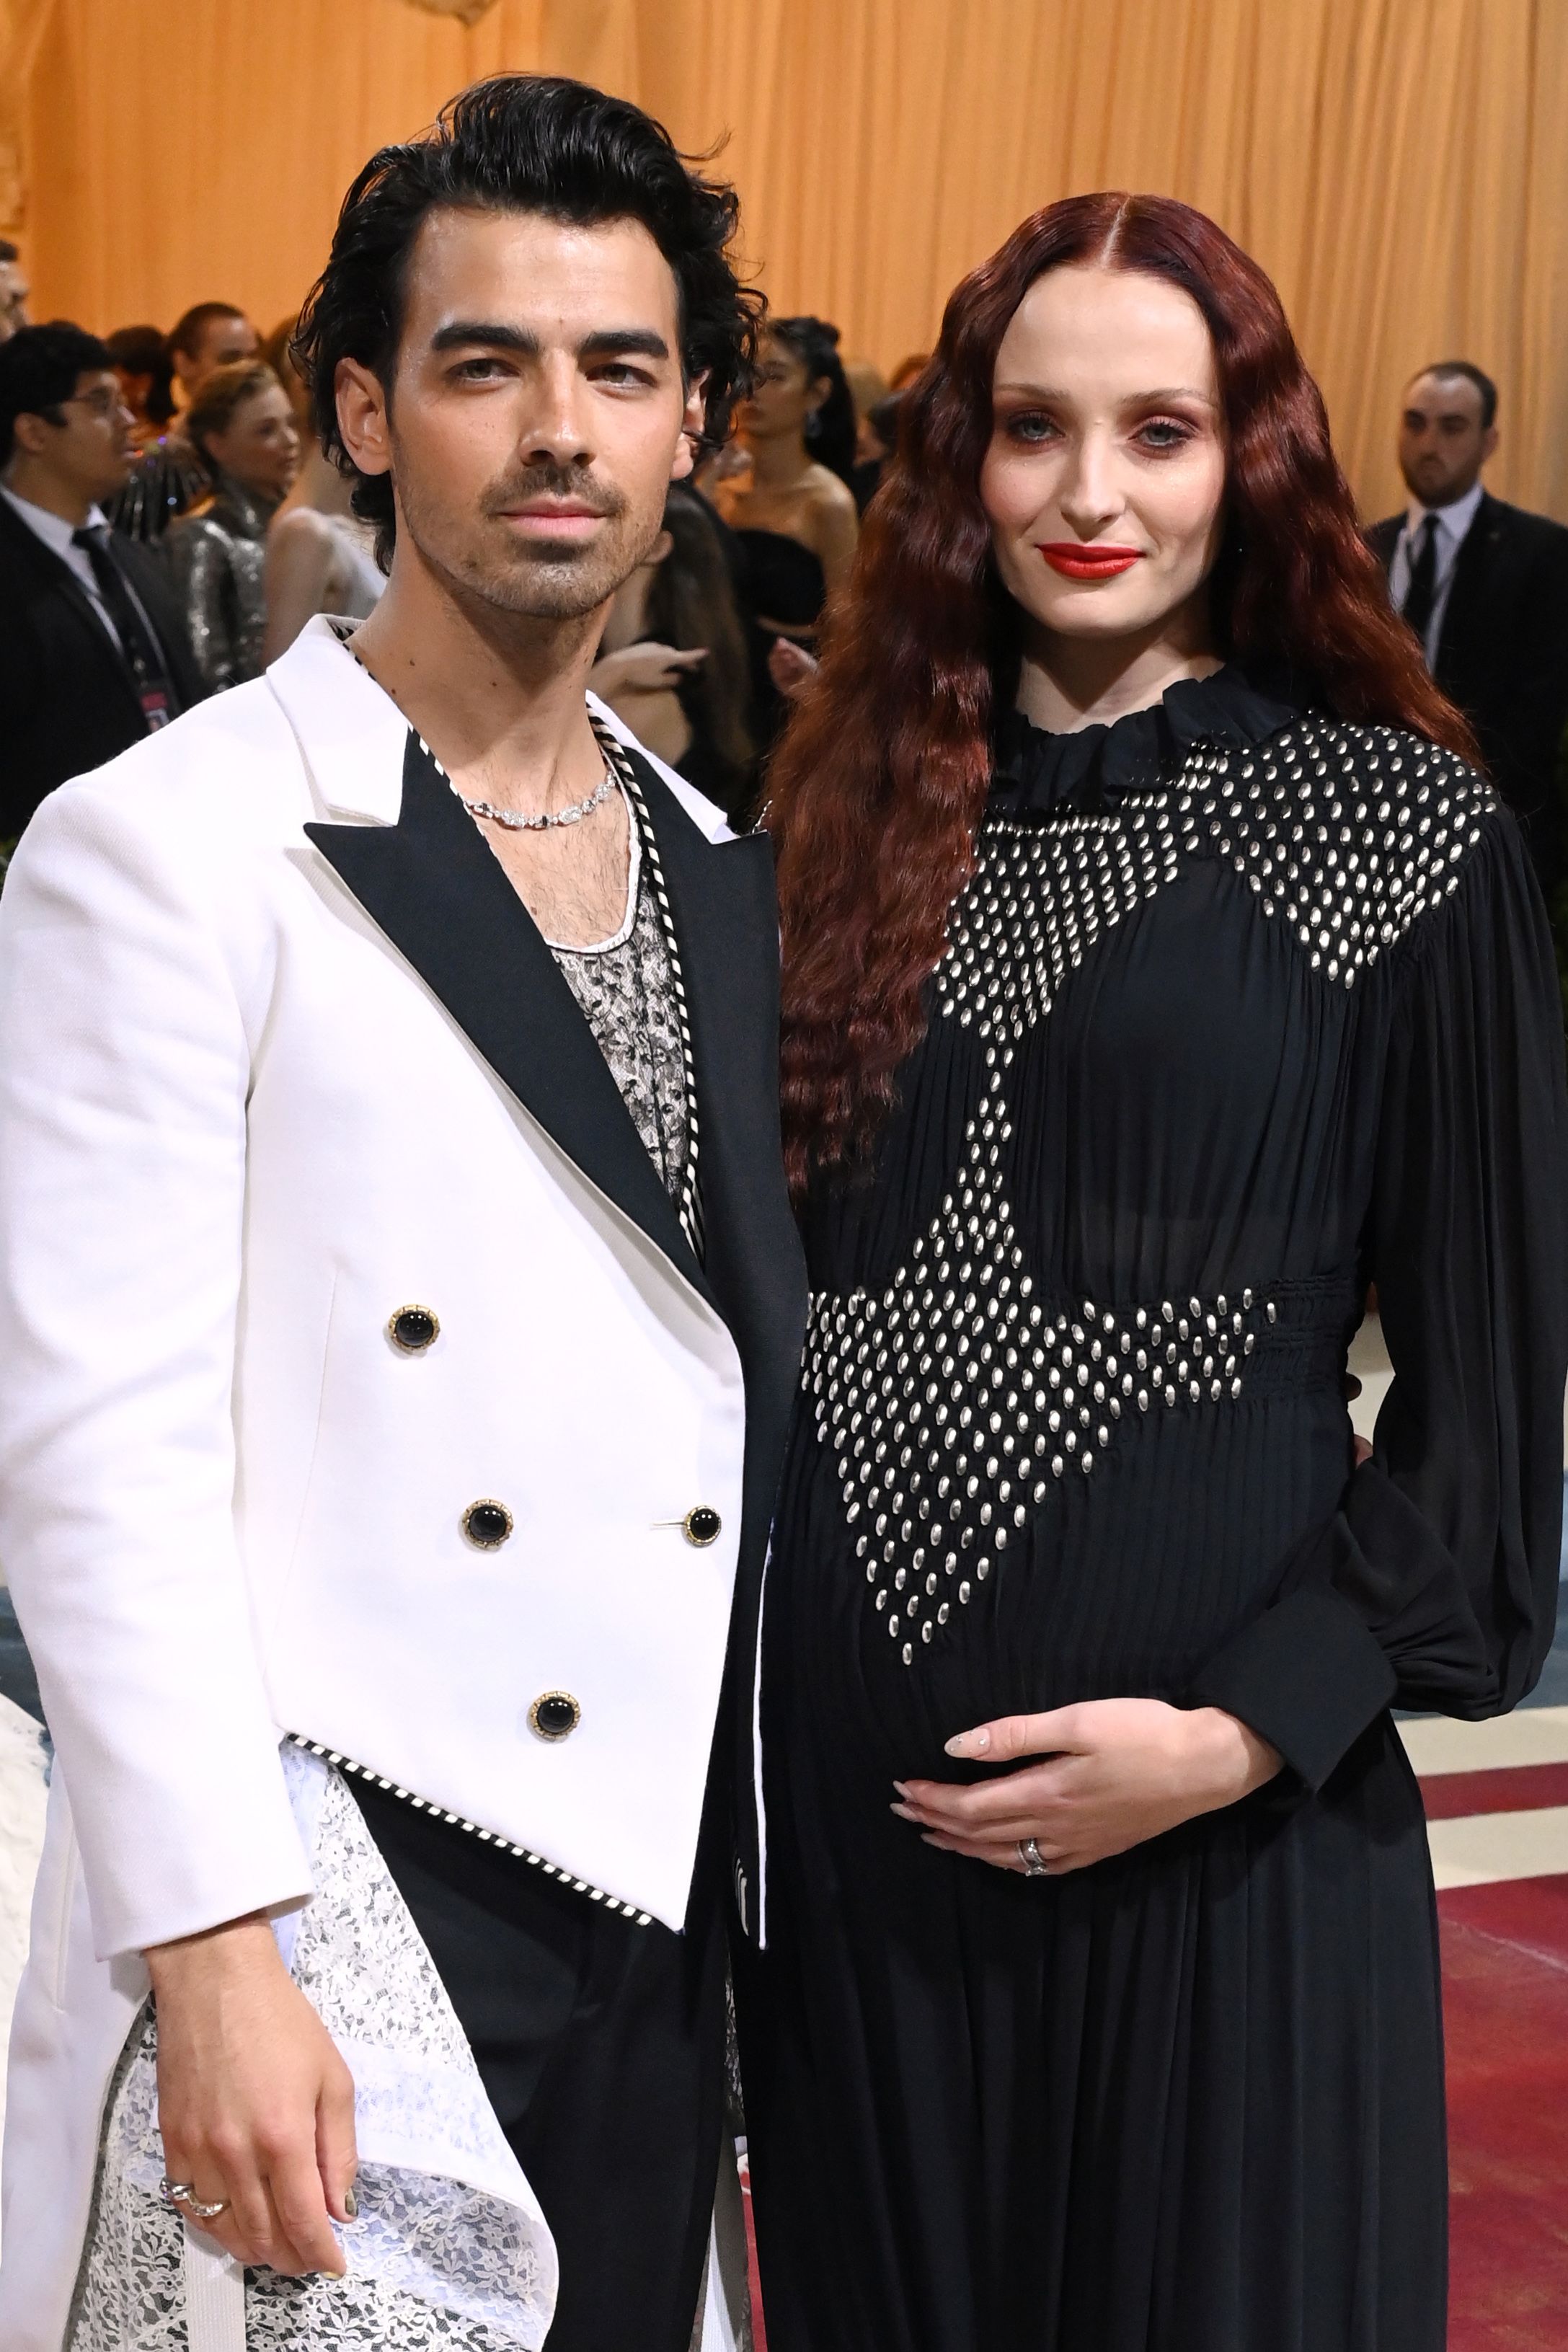 Sophie Turner Gives Birth to Baby No. 2 With Joe Jonas